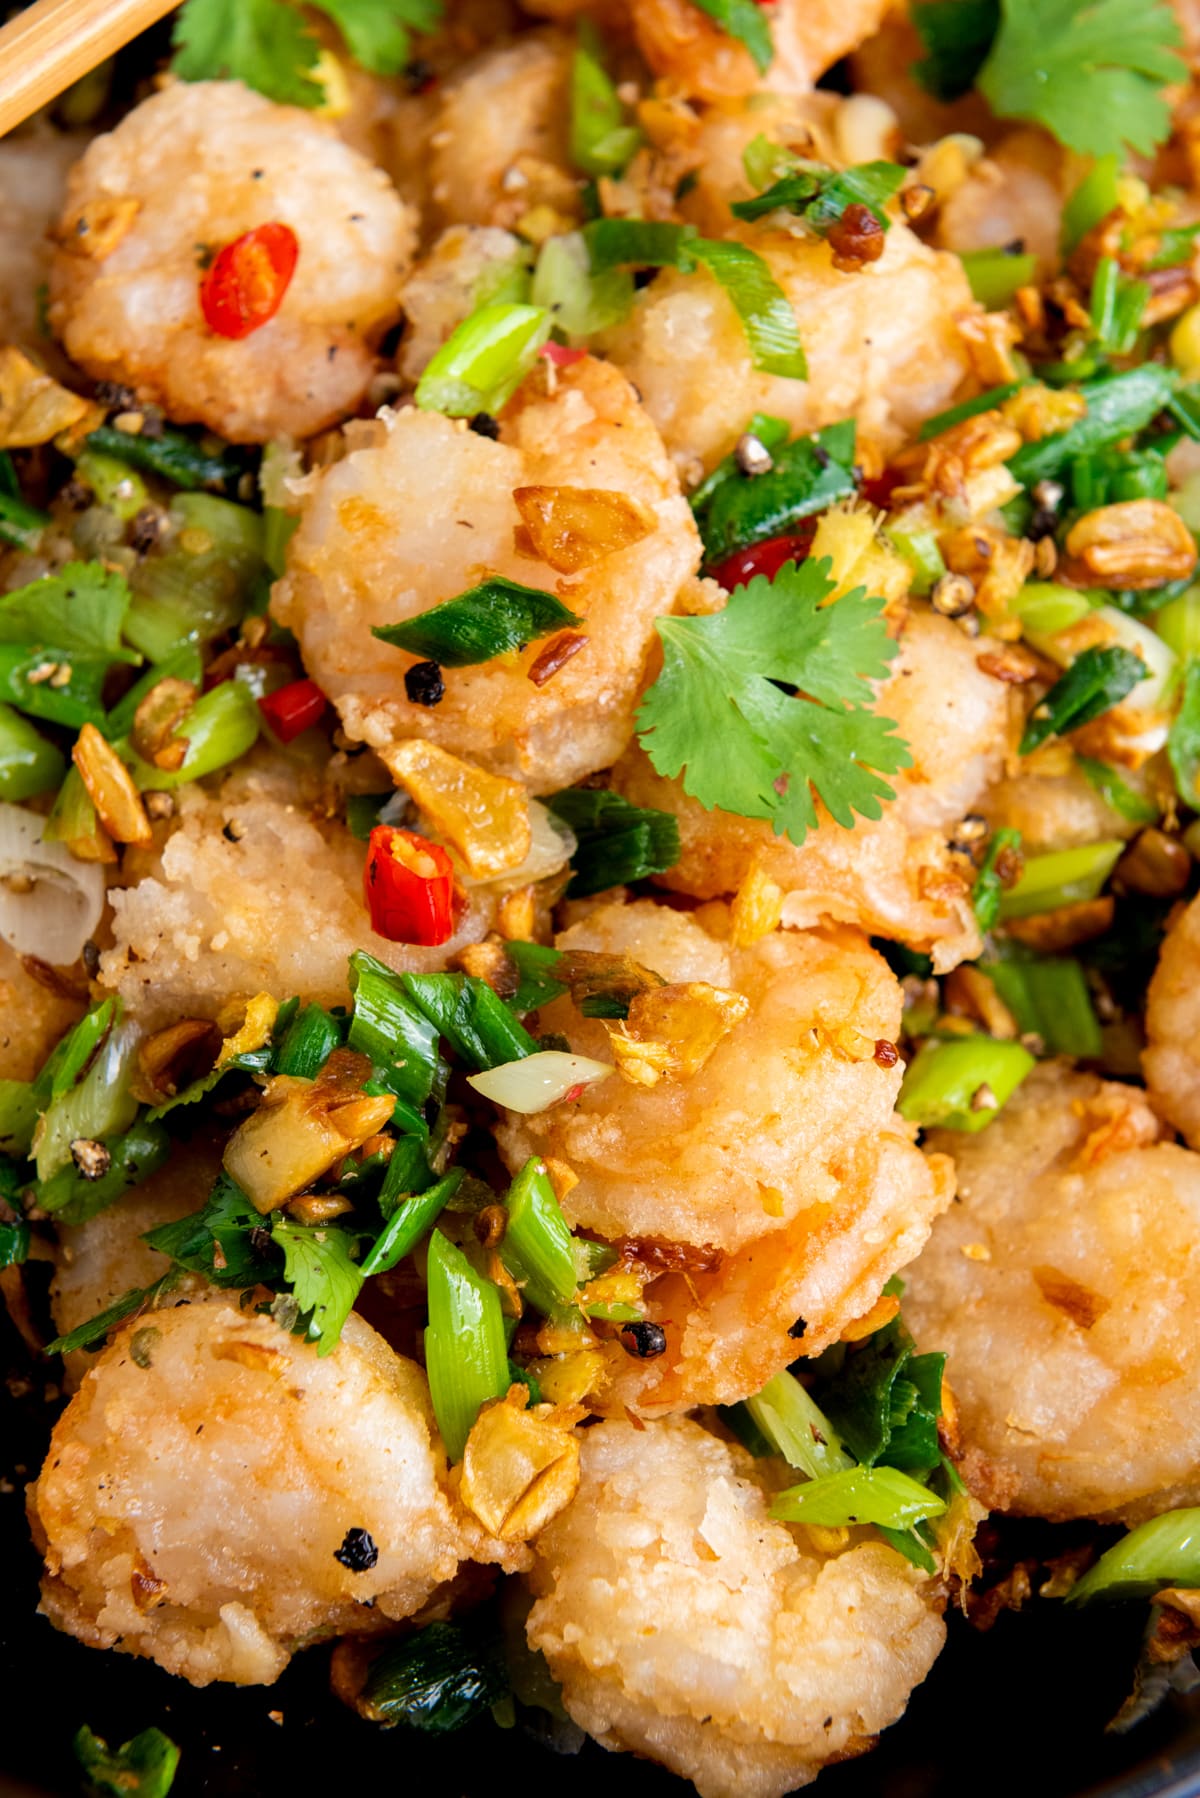 A close-up image of Chinese salt and pepper shrimp with sautéed vegetables and herbs.